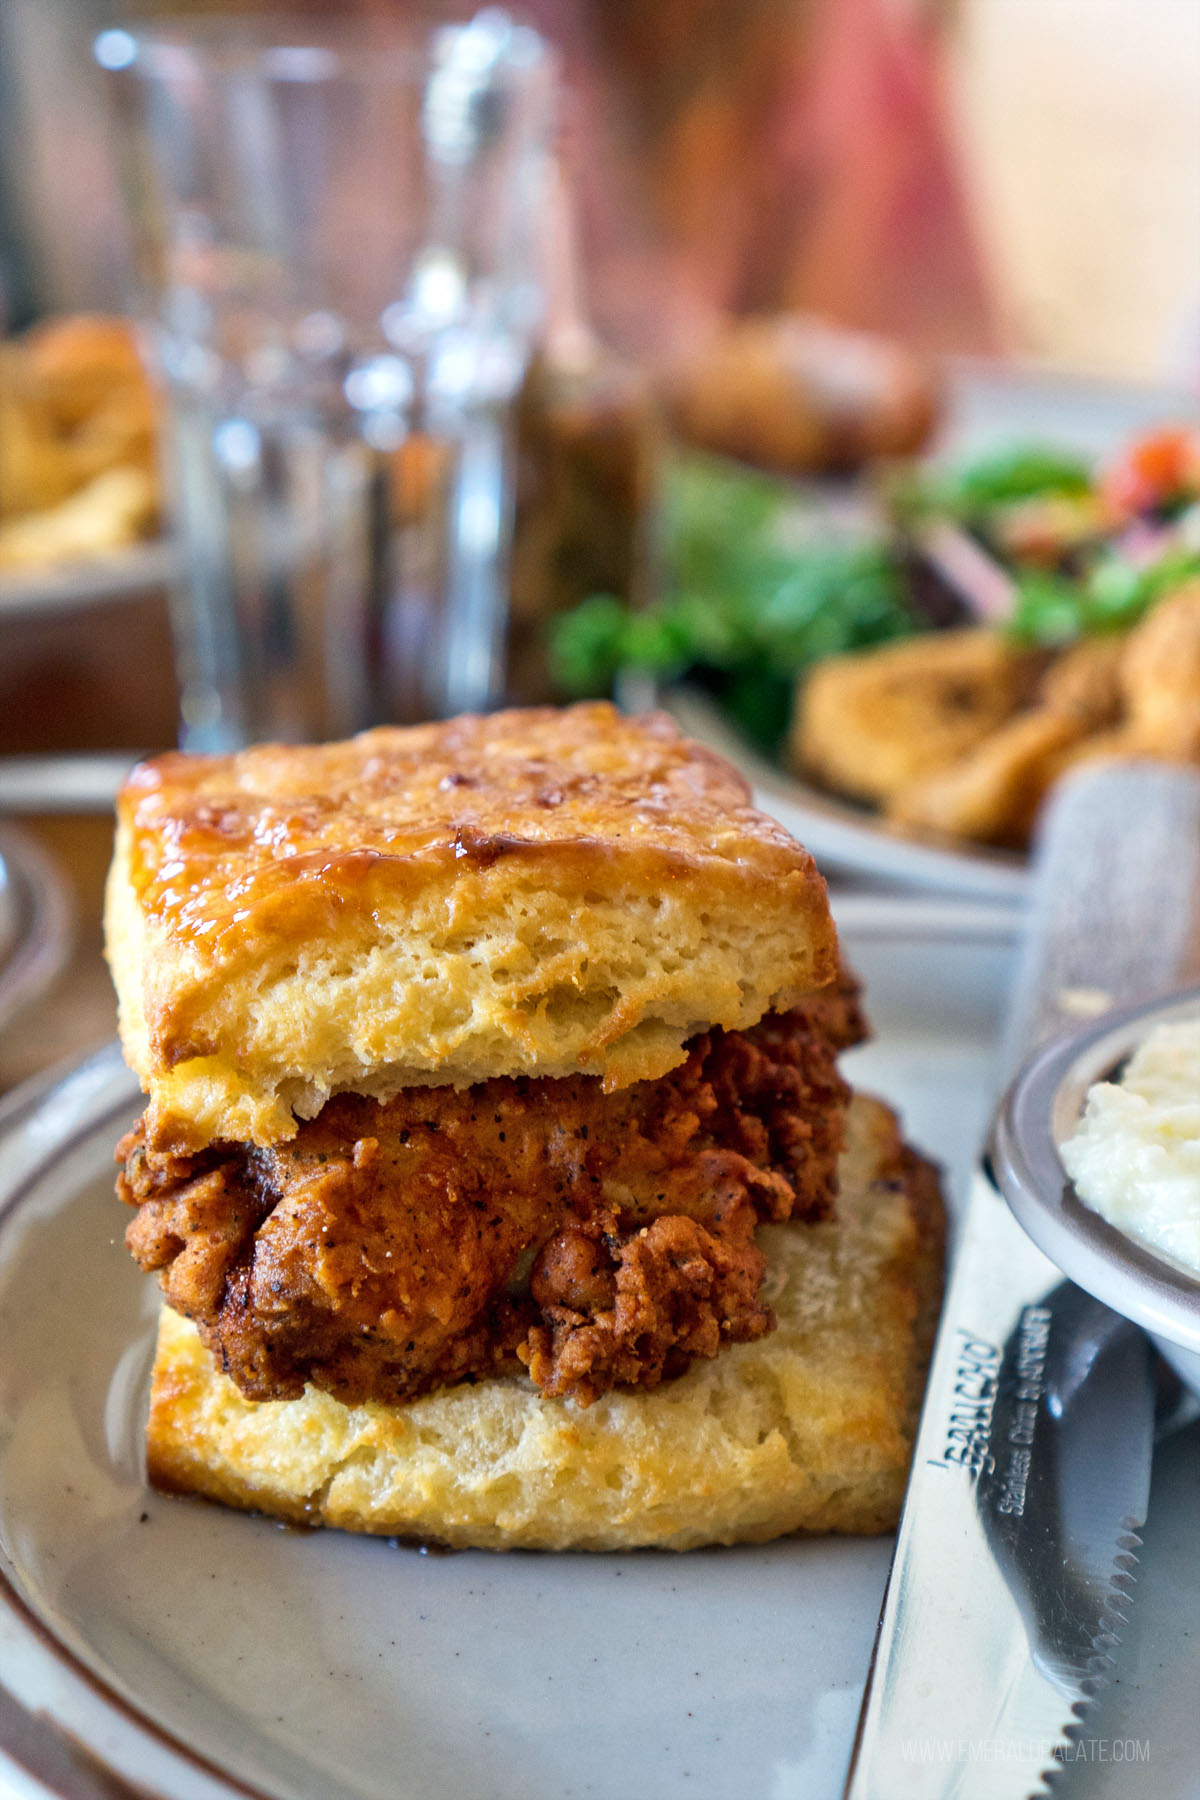 fried chicken sandwich with a biscuit